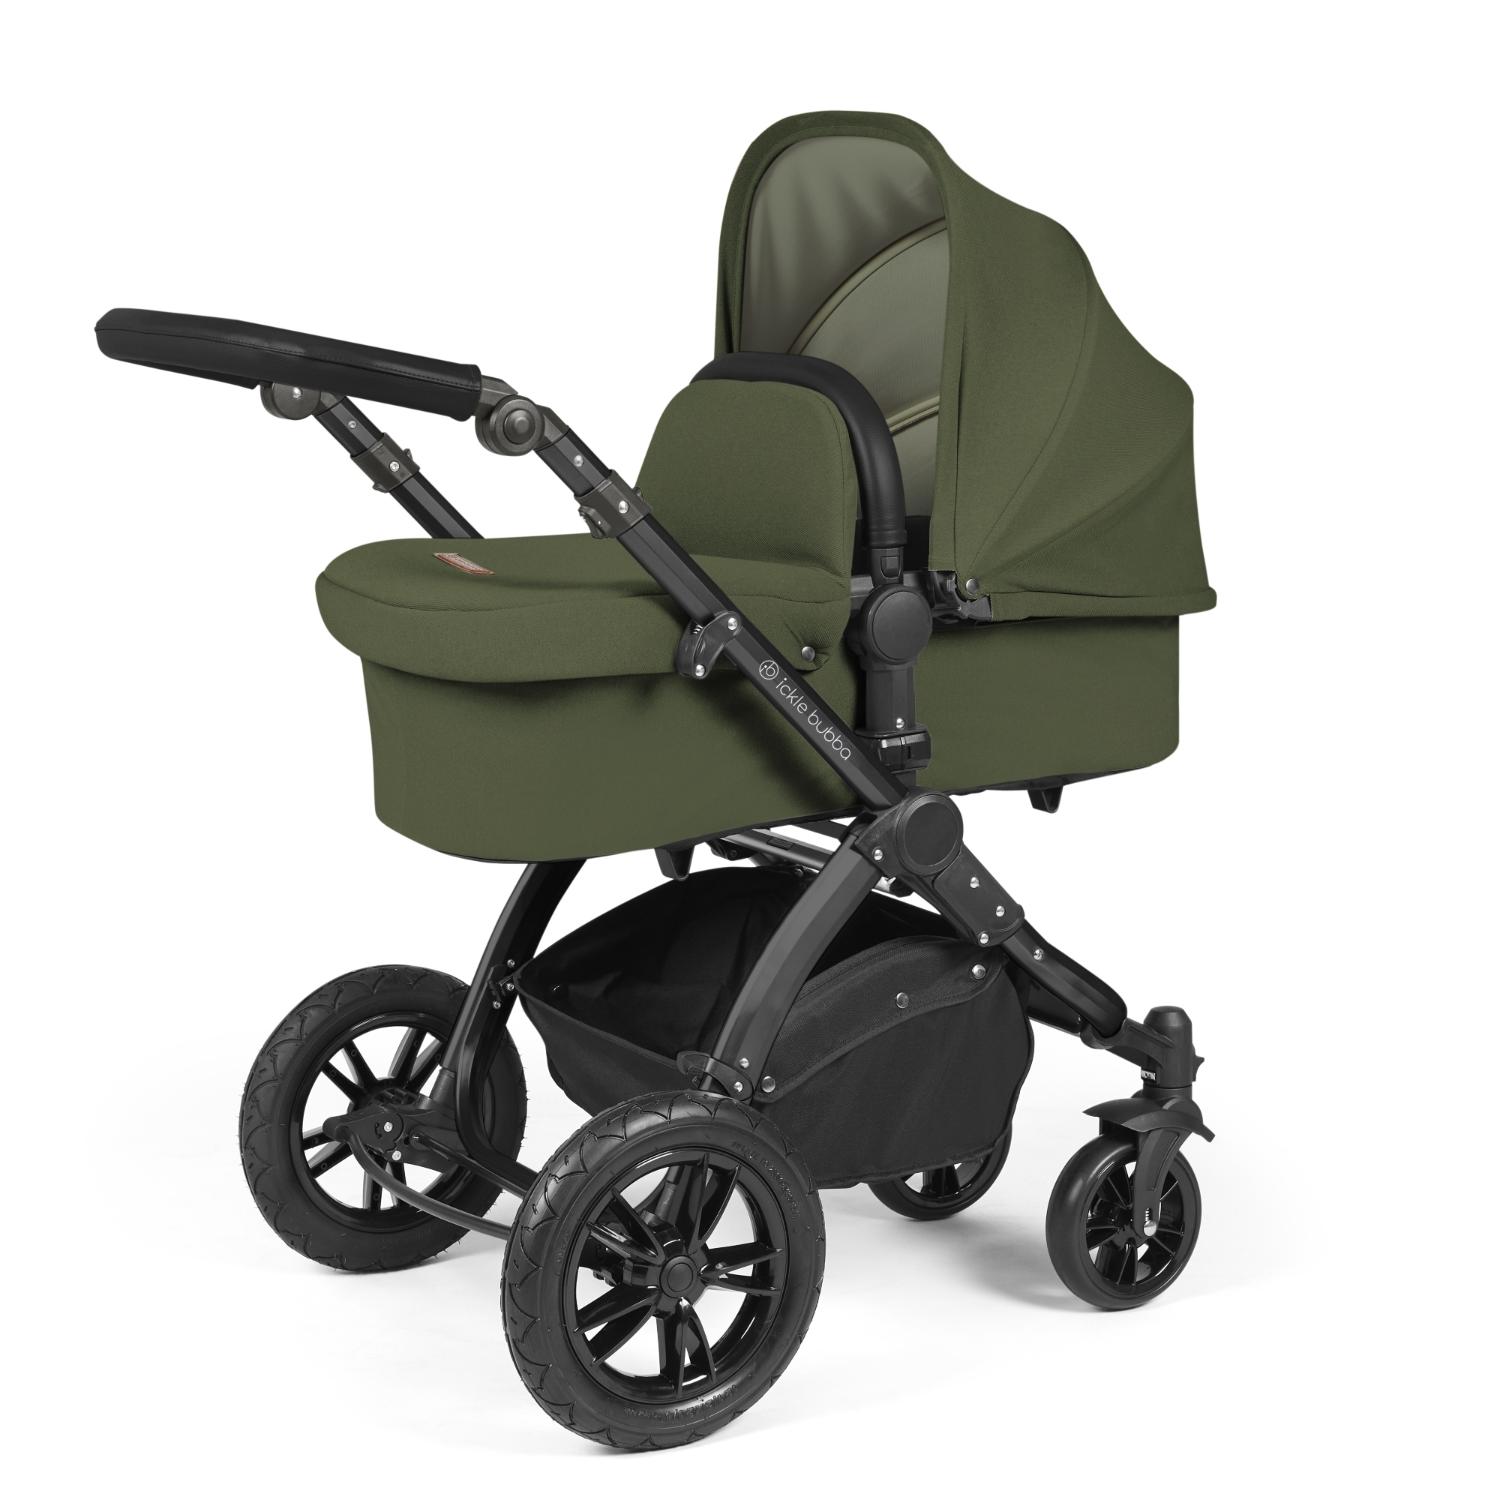 Ickle Bubba Stomp Luxe Pushchair with carrycot attached in Woodland green colour